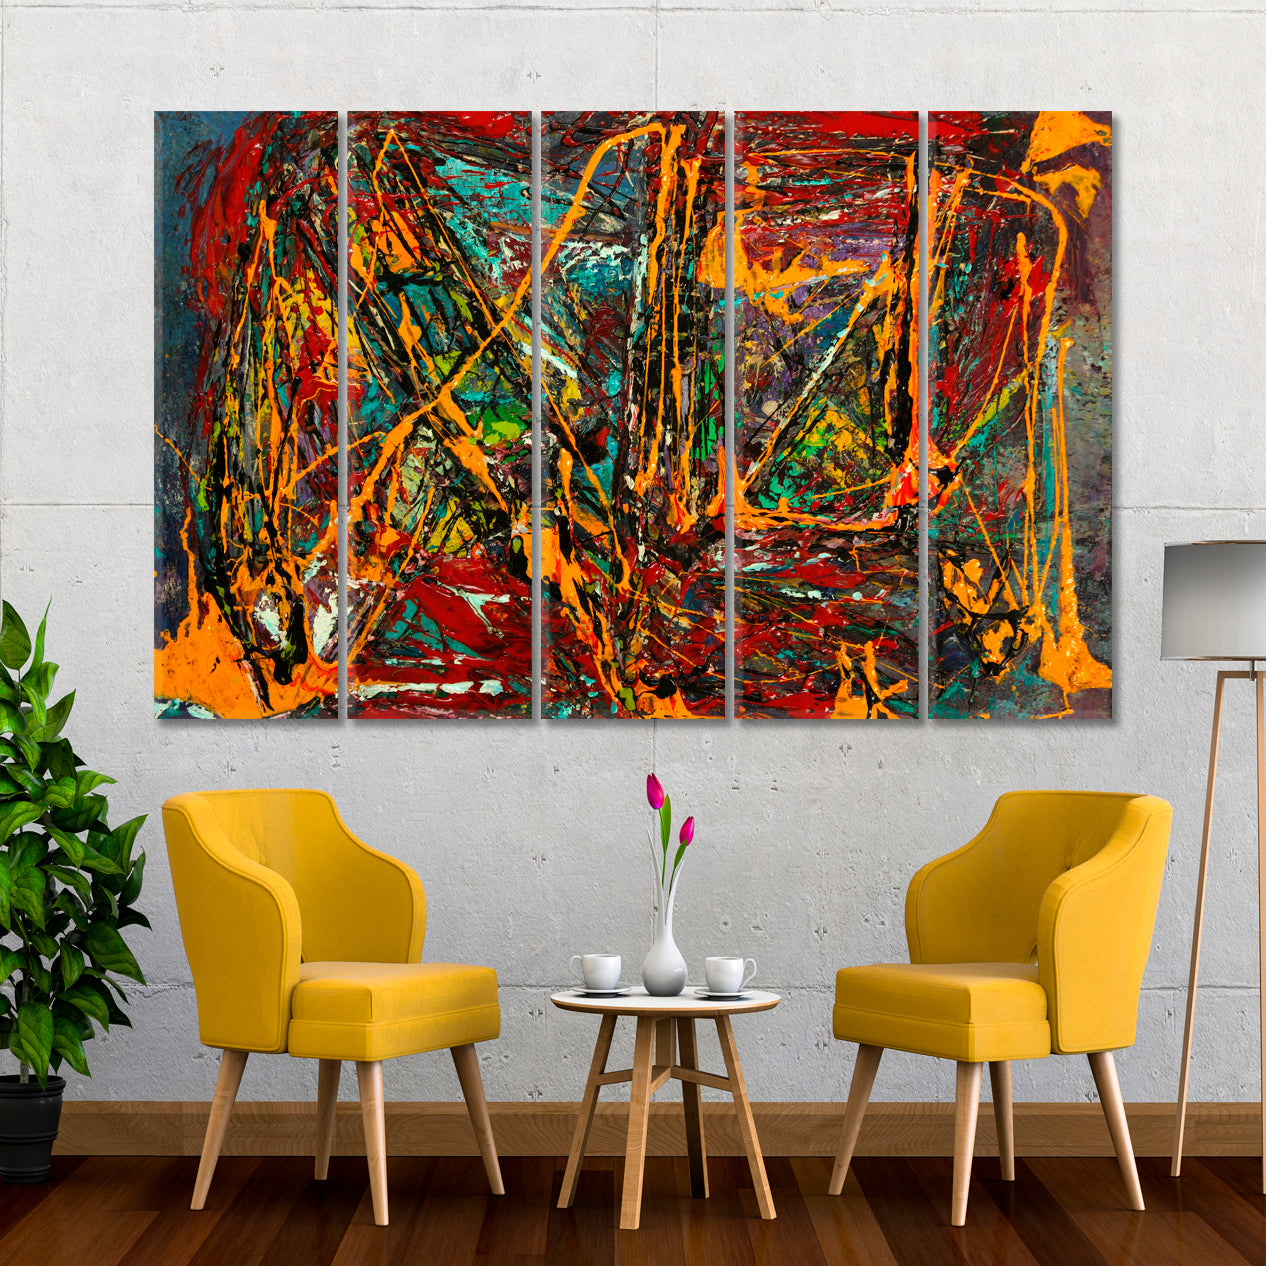 Beautiful Abstract Fire Flame Abstract Art Print Artesty 5 panels 36" x 24" 